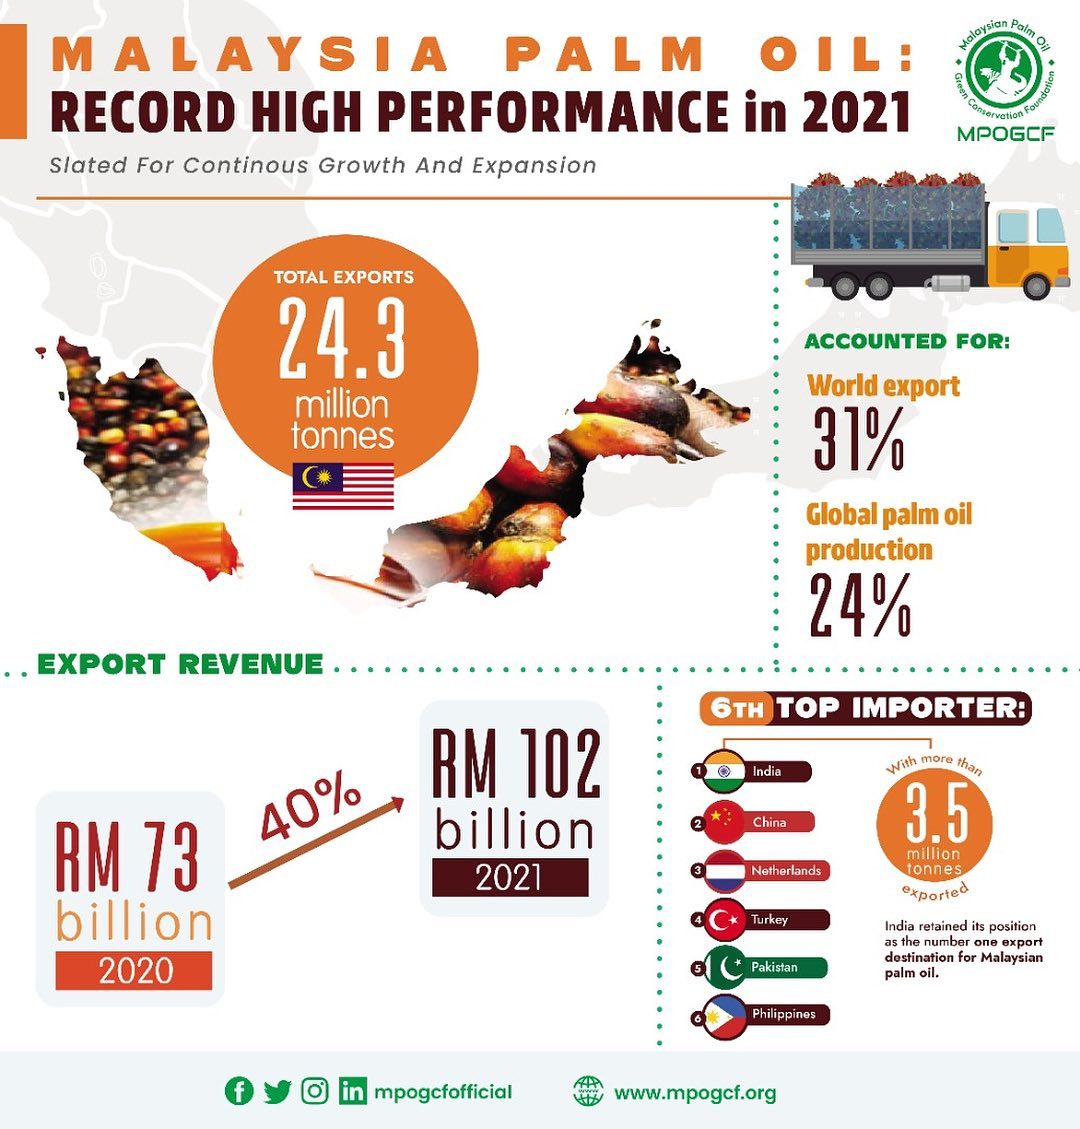 Malaysia Palm Oil Record High Performance in 2021